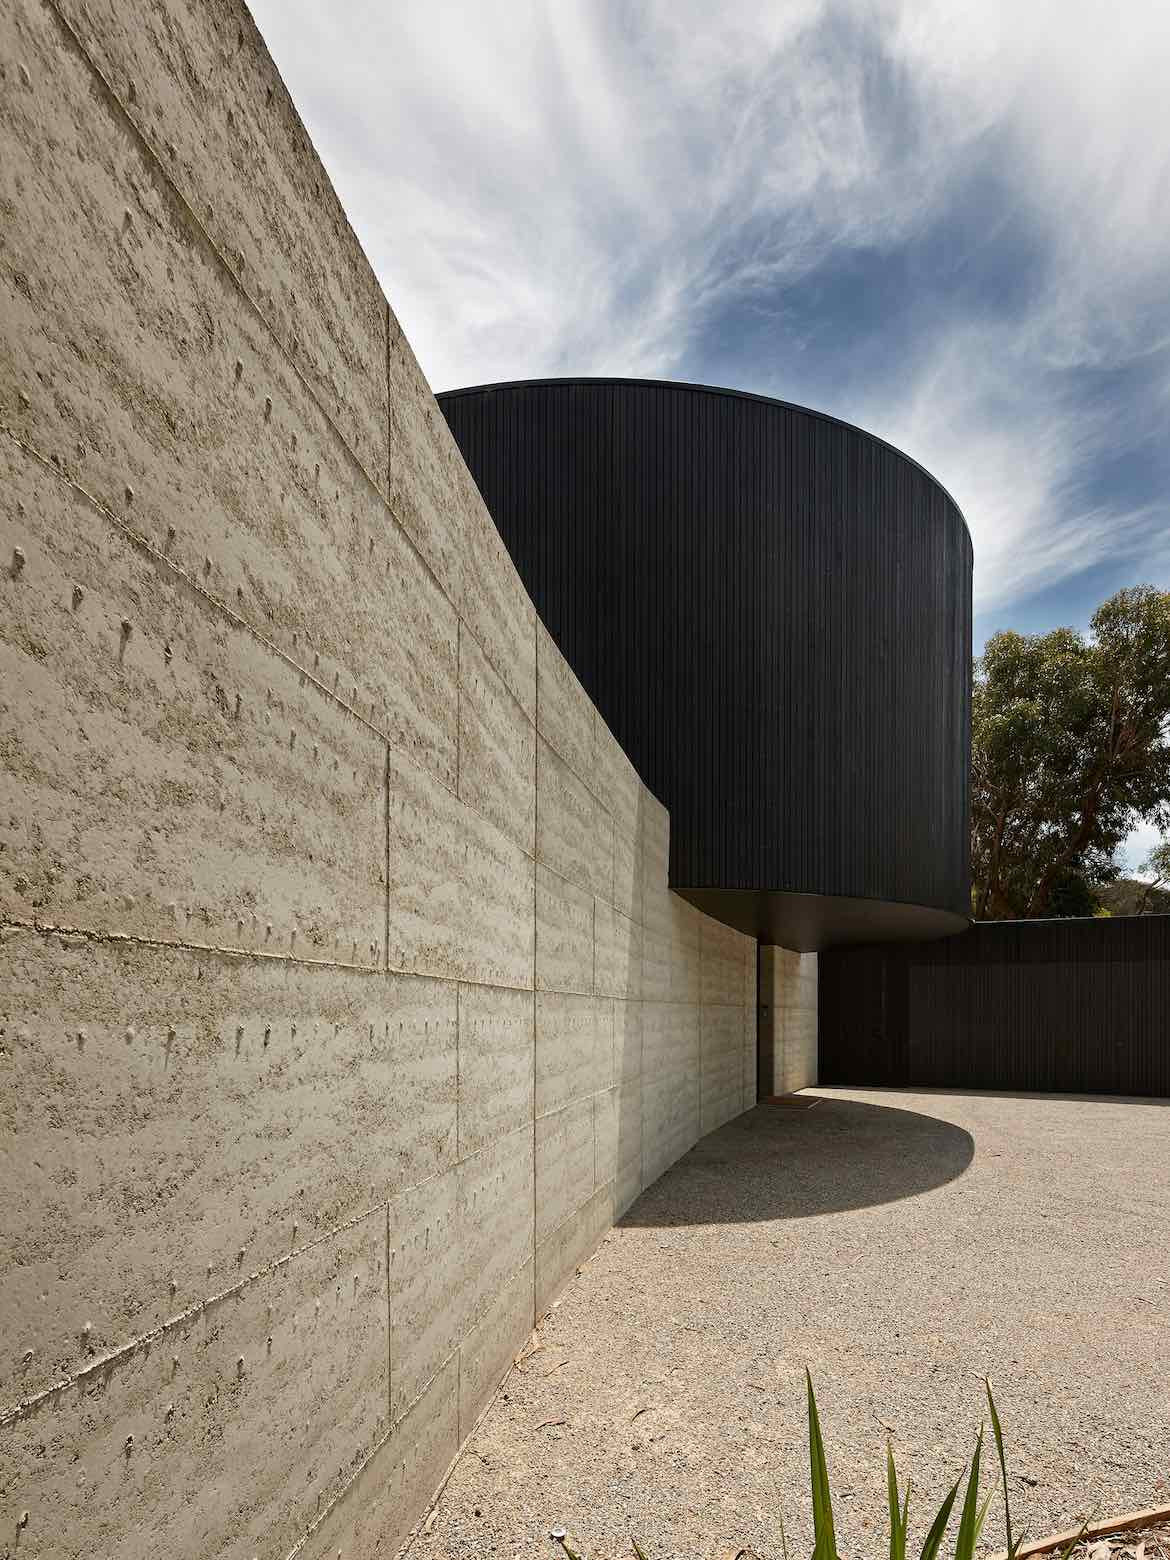 Large beige bricks make up the exterior rammed earth wall of Portsea House by Wood Marsh